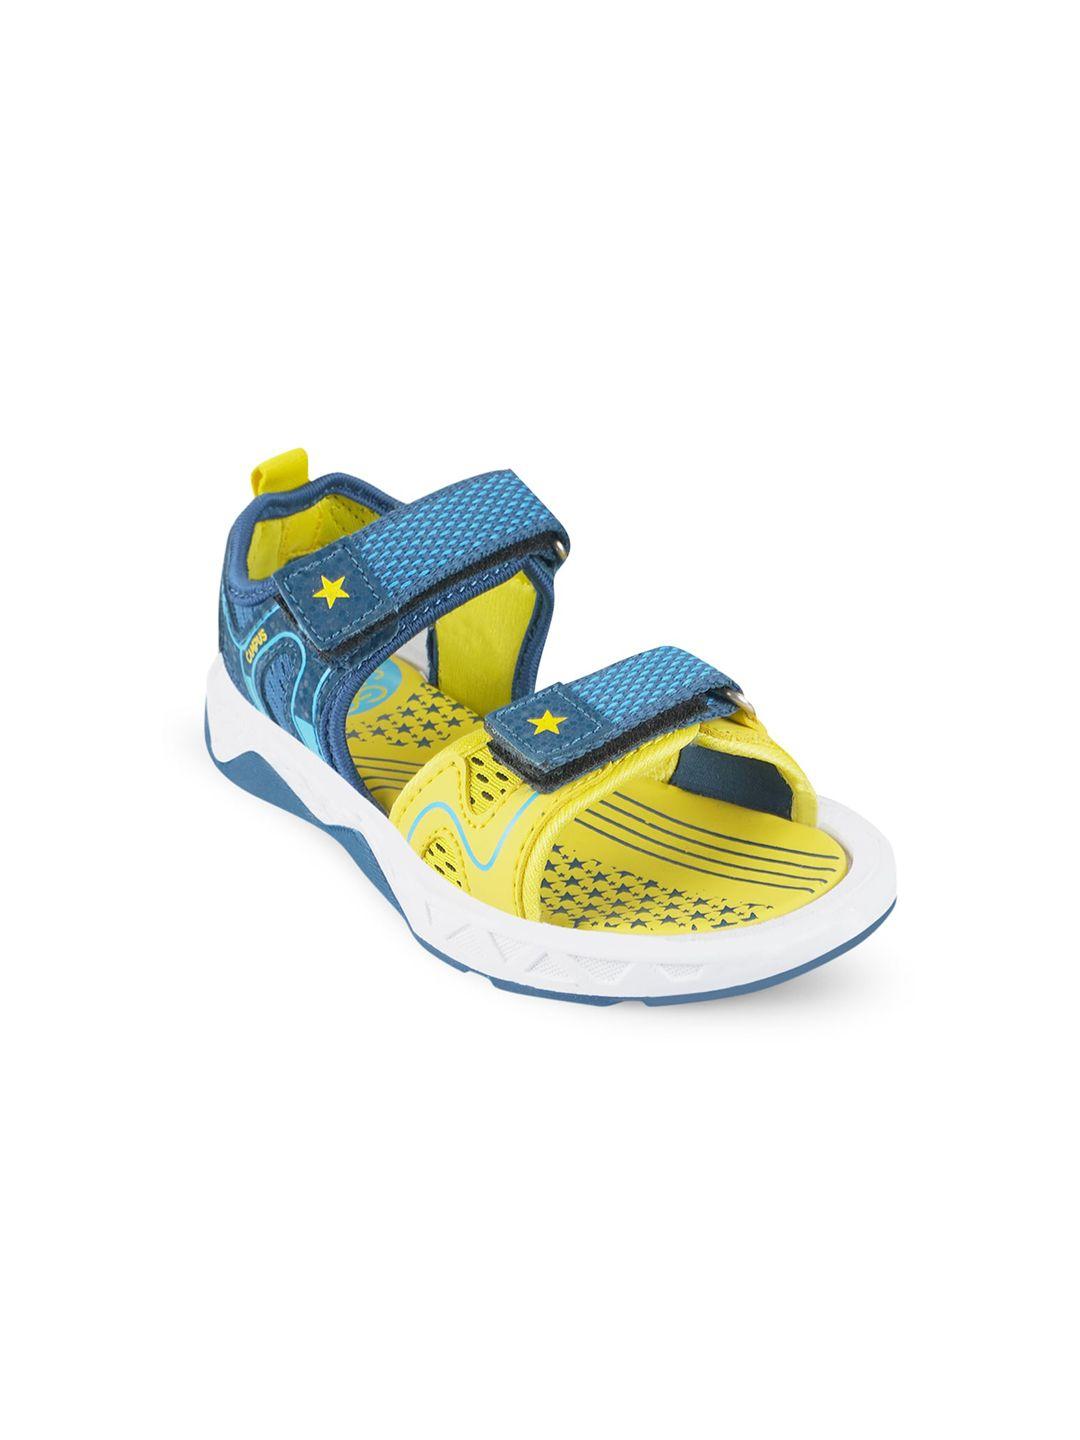 campus kids blue & yellow solid sports sandals